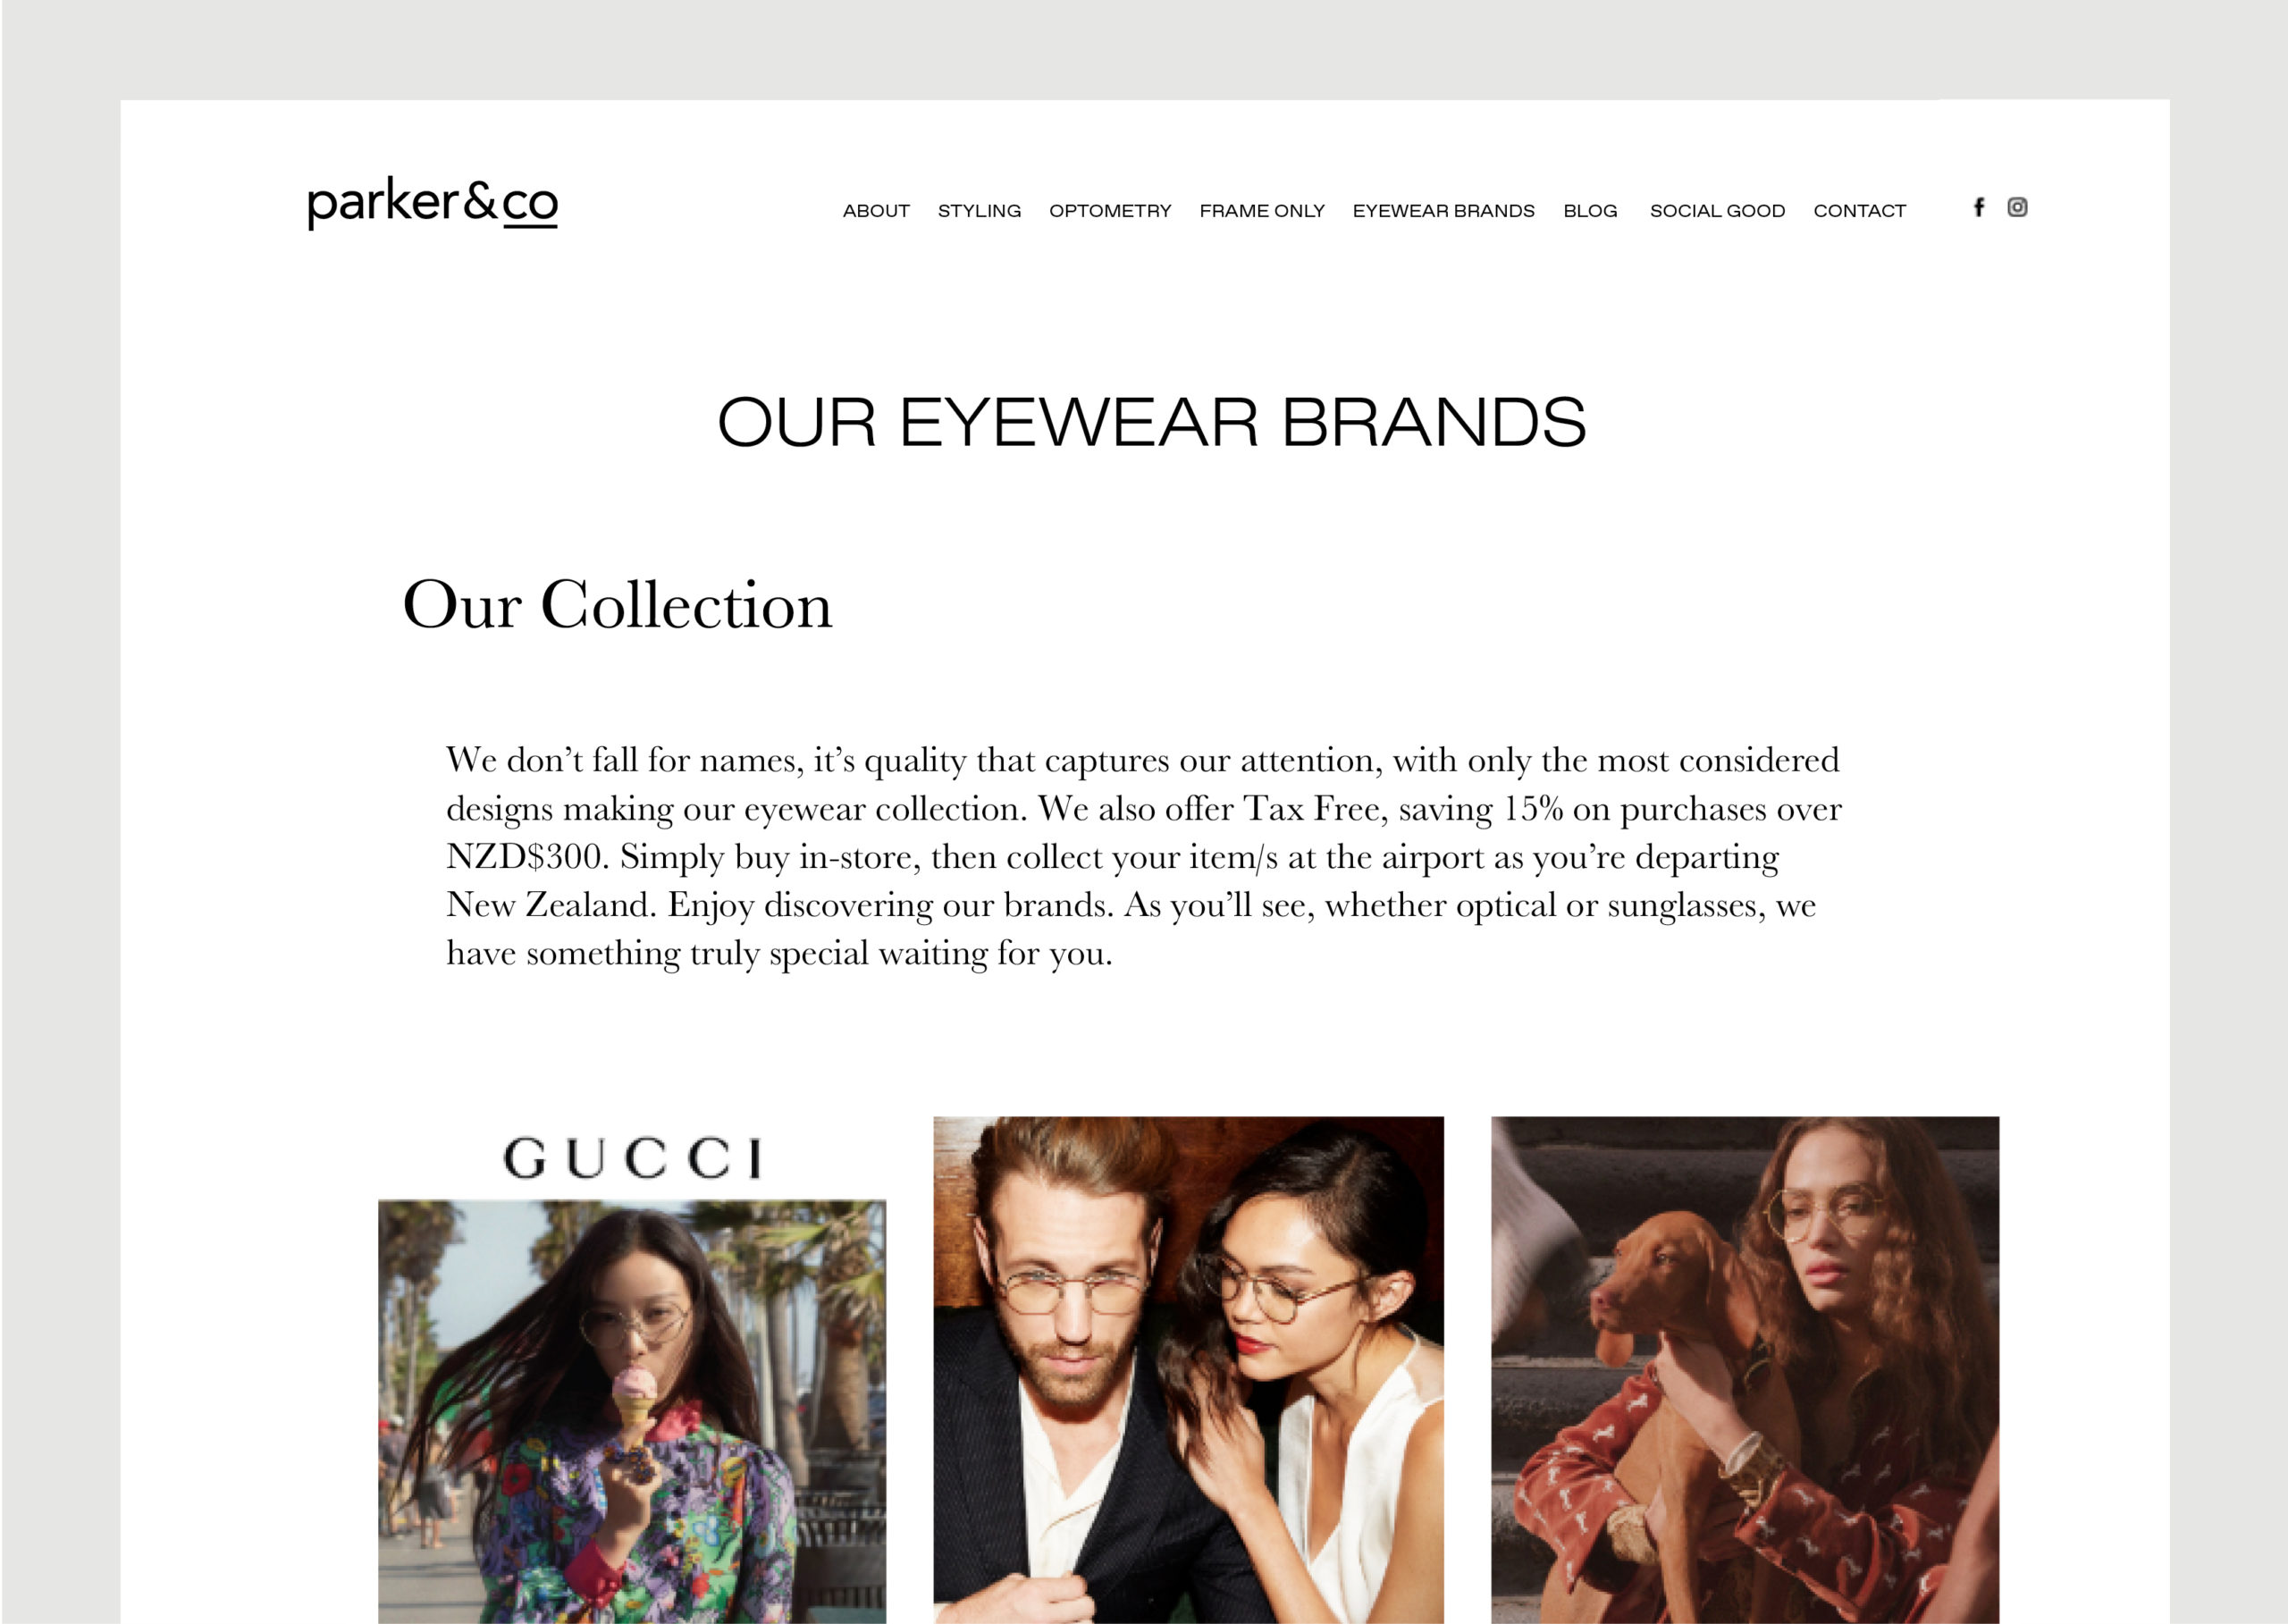 Parker and Co website – Eyewear Brands page – shows images of designer brands and large introductory copy